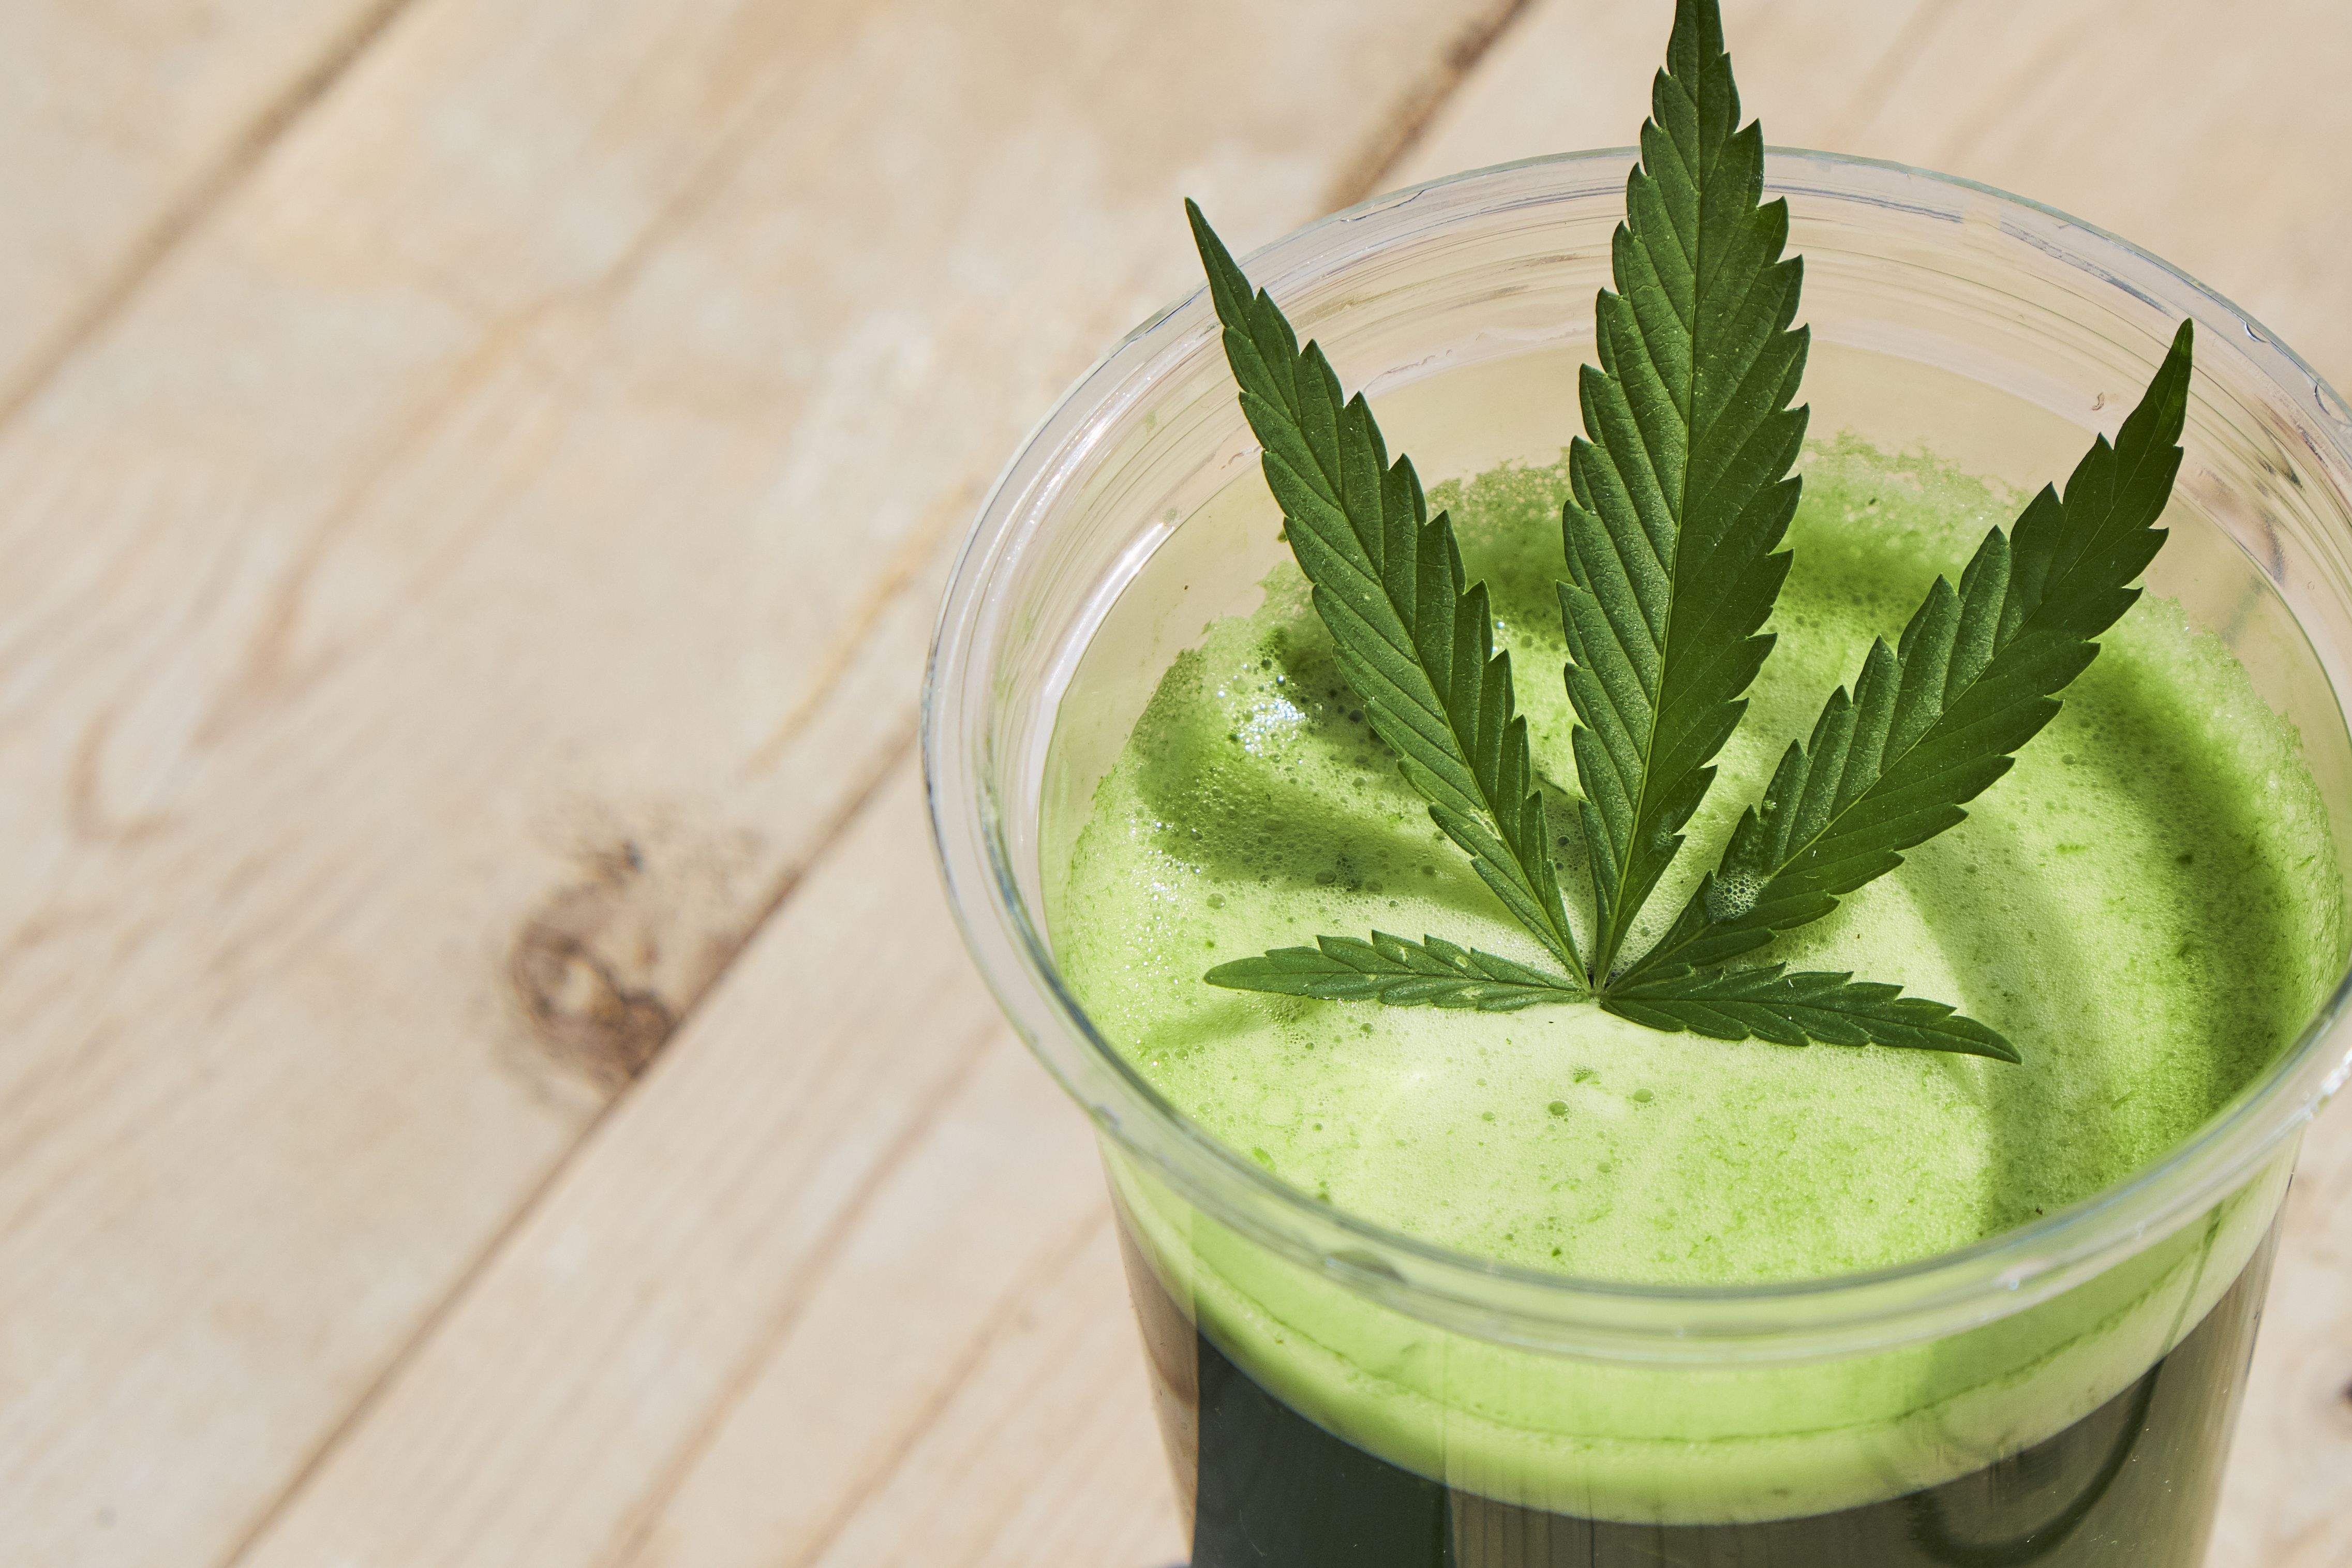 Healthy cannabis smoothie on wooden background. Natural supplement, detox and healthy living.